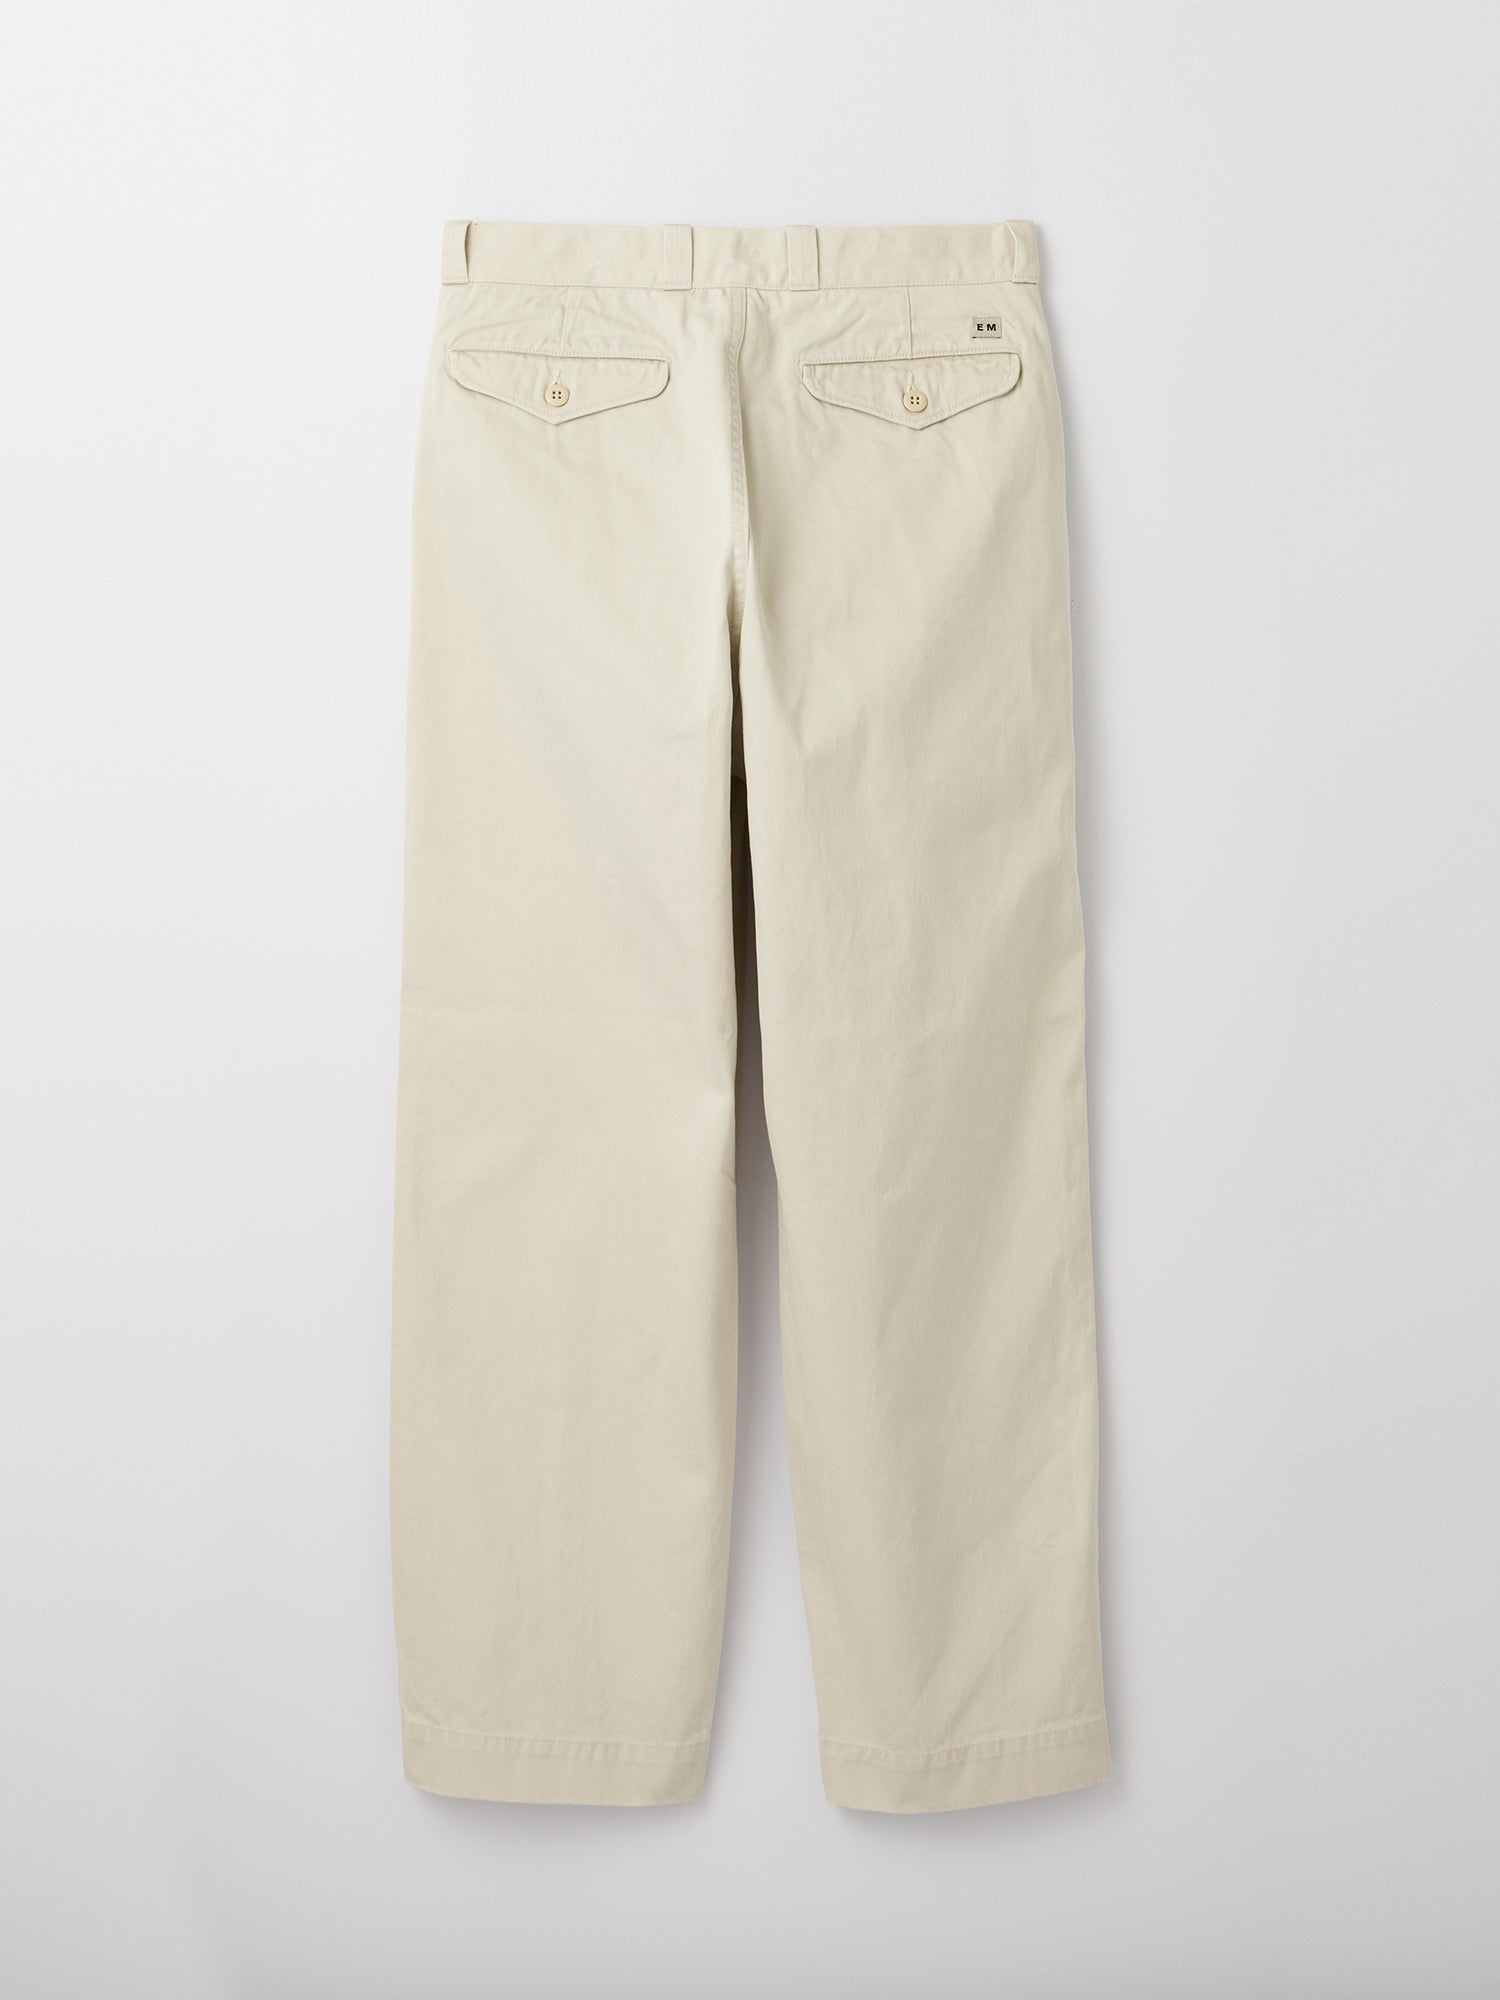 ENDS and MEANS army chino pant S ホワイト-